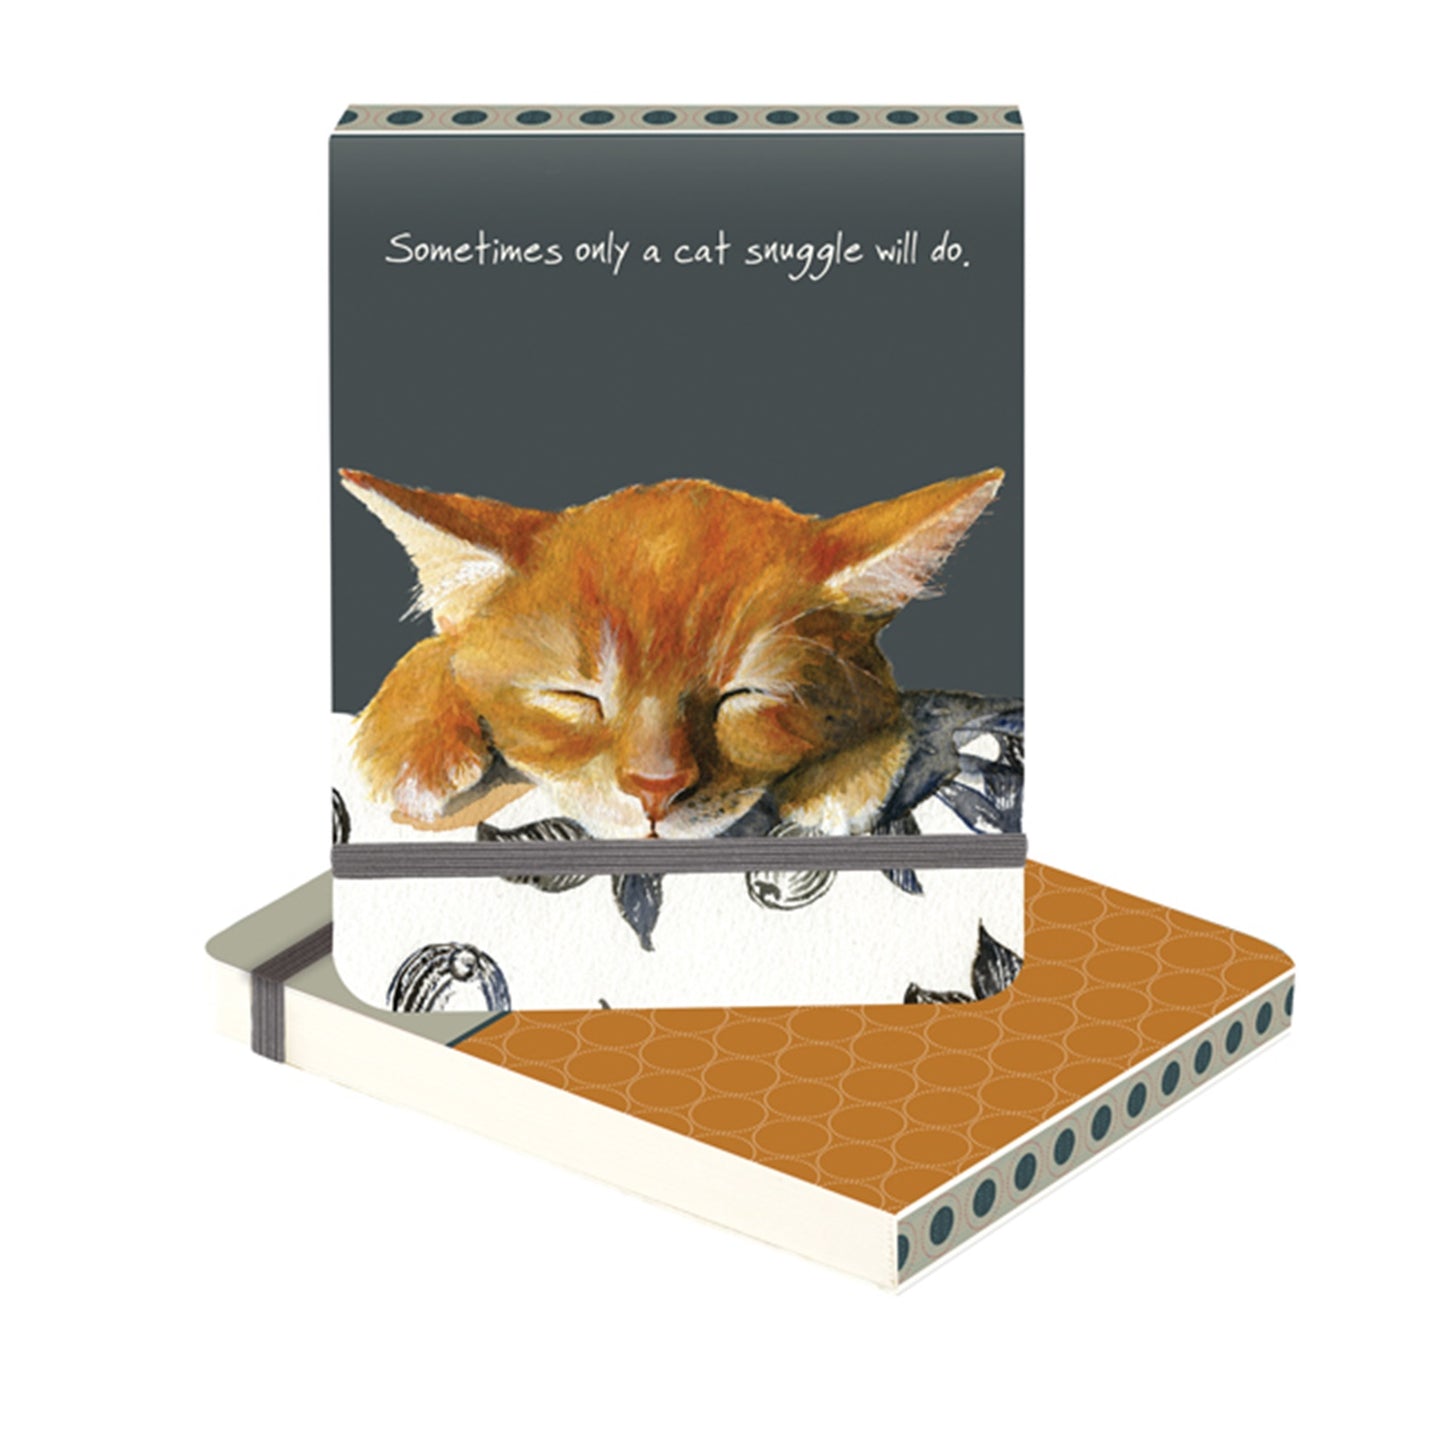 Snuggle' Ginger Cat Small Pocket Blank Notebook Note Pad Notepad LDSB08